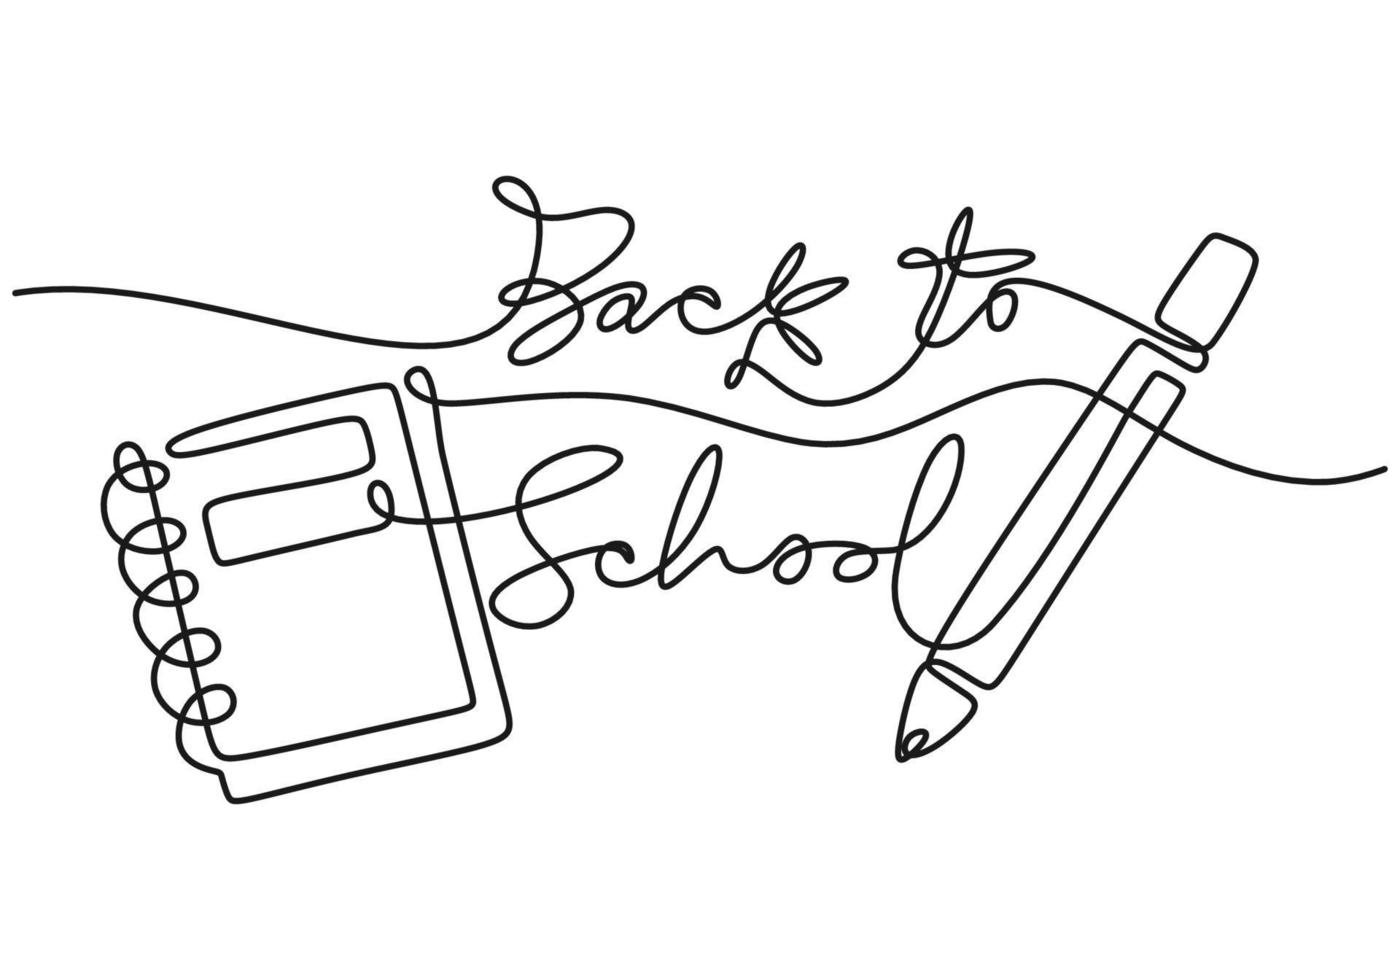 Continuous one line drawing of back to school handwritten words with note book and pencil isolated on white background. vector